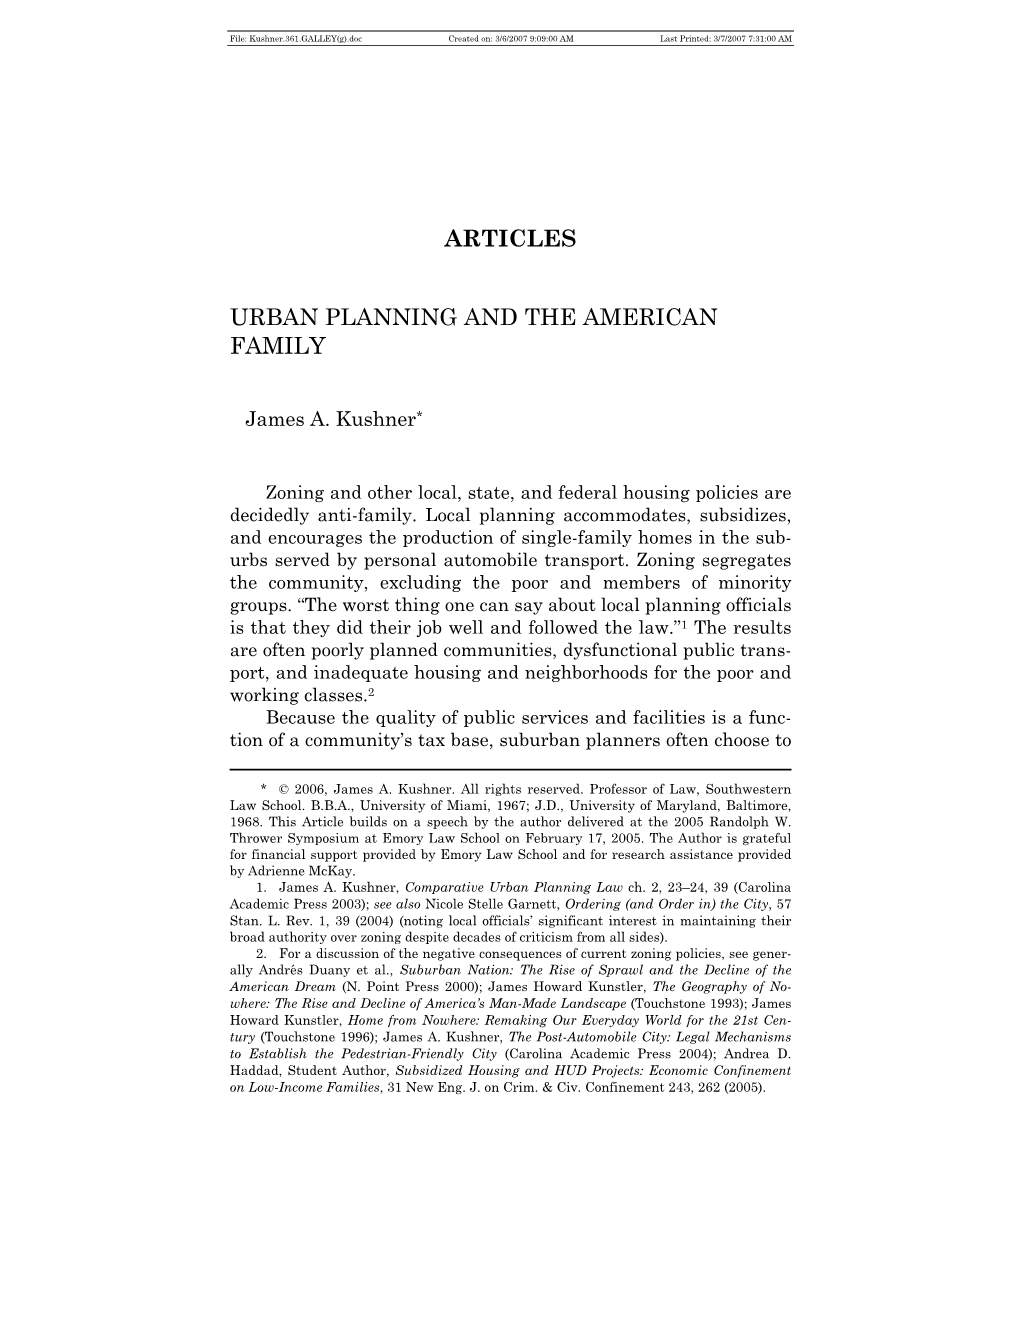 Articles Urban Planning and the American Family